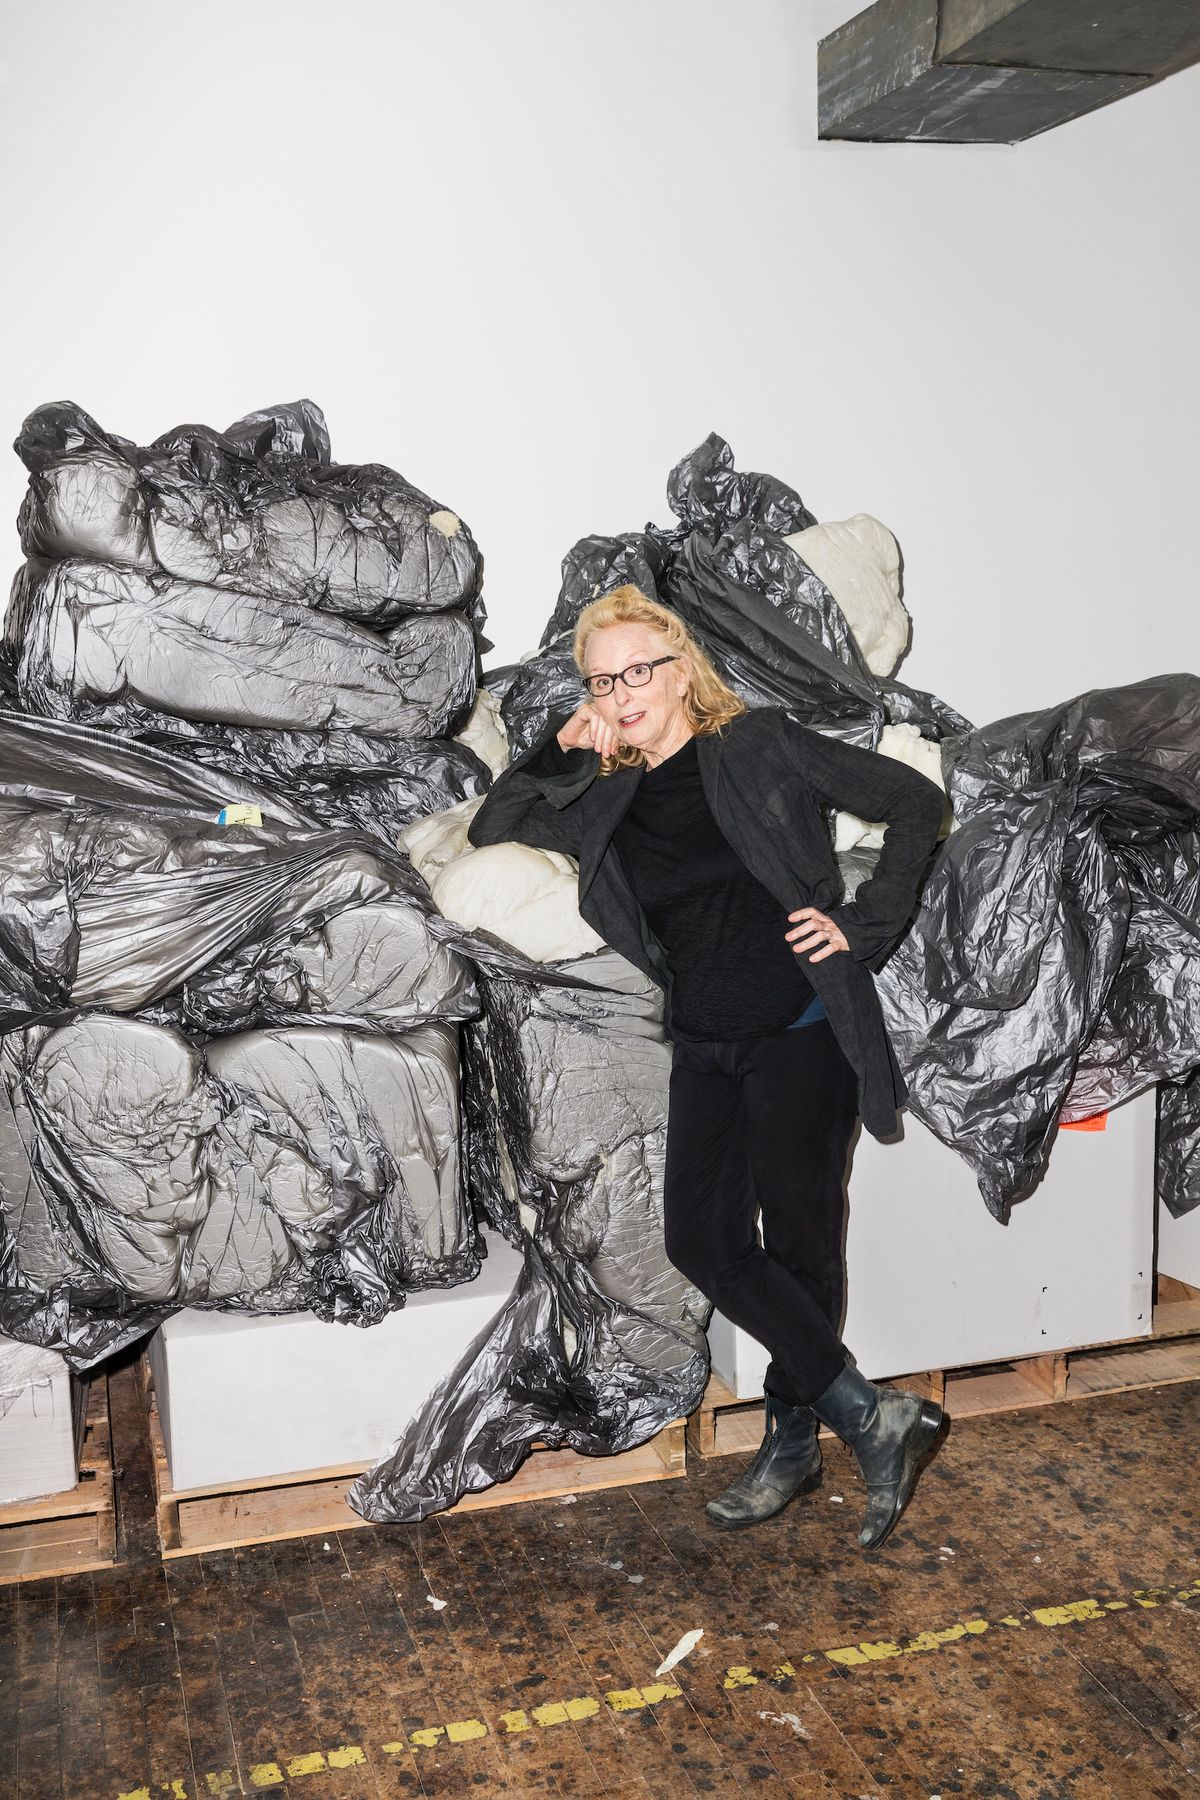 The New York-based artist Arlene Shechet is one of the alumni artists participating in the Madison Square Park Conservancy's digital initiative #MadSqArtFromHome Photo: Jeremy Liebman and courtesy of the artists and Pace Gallery